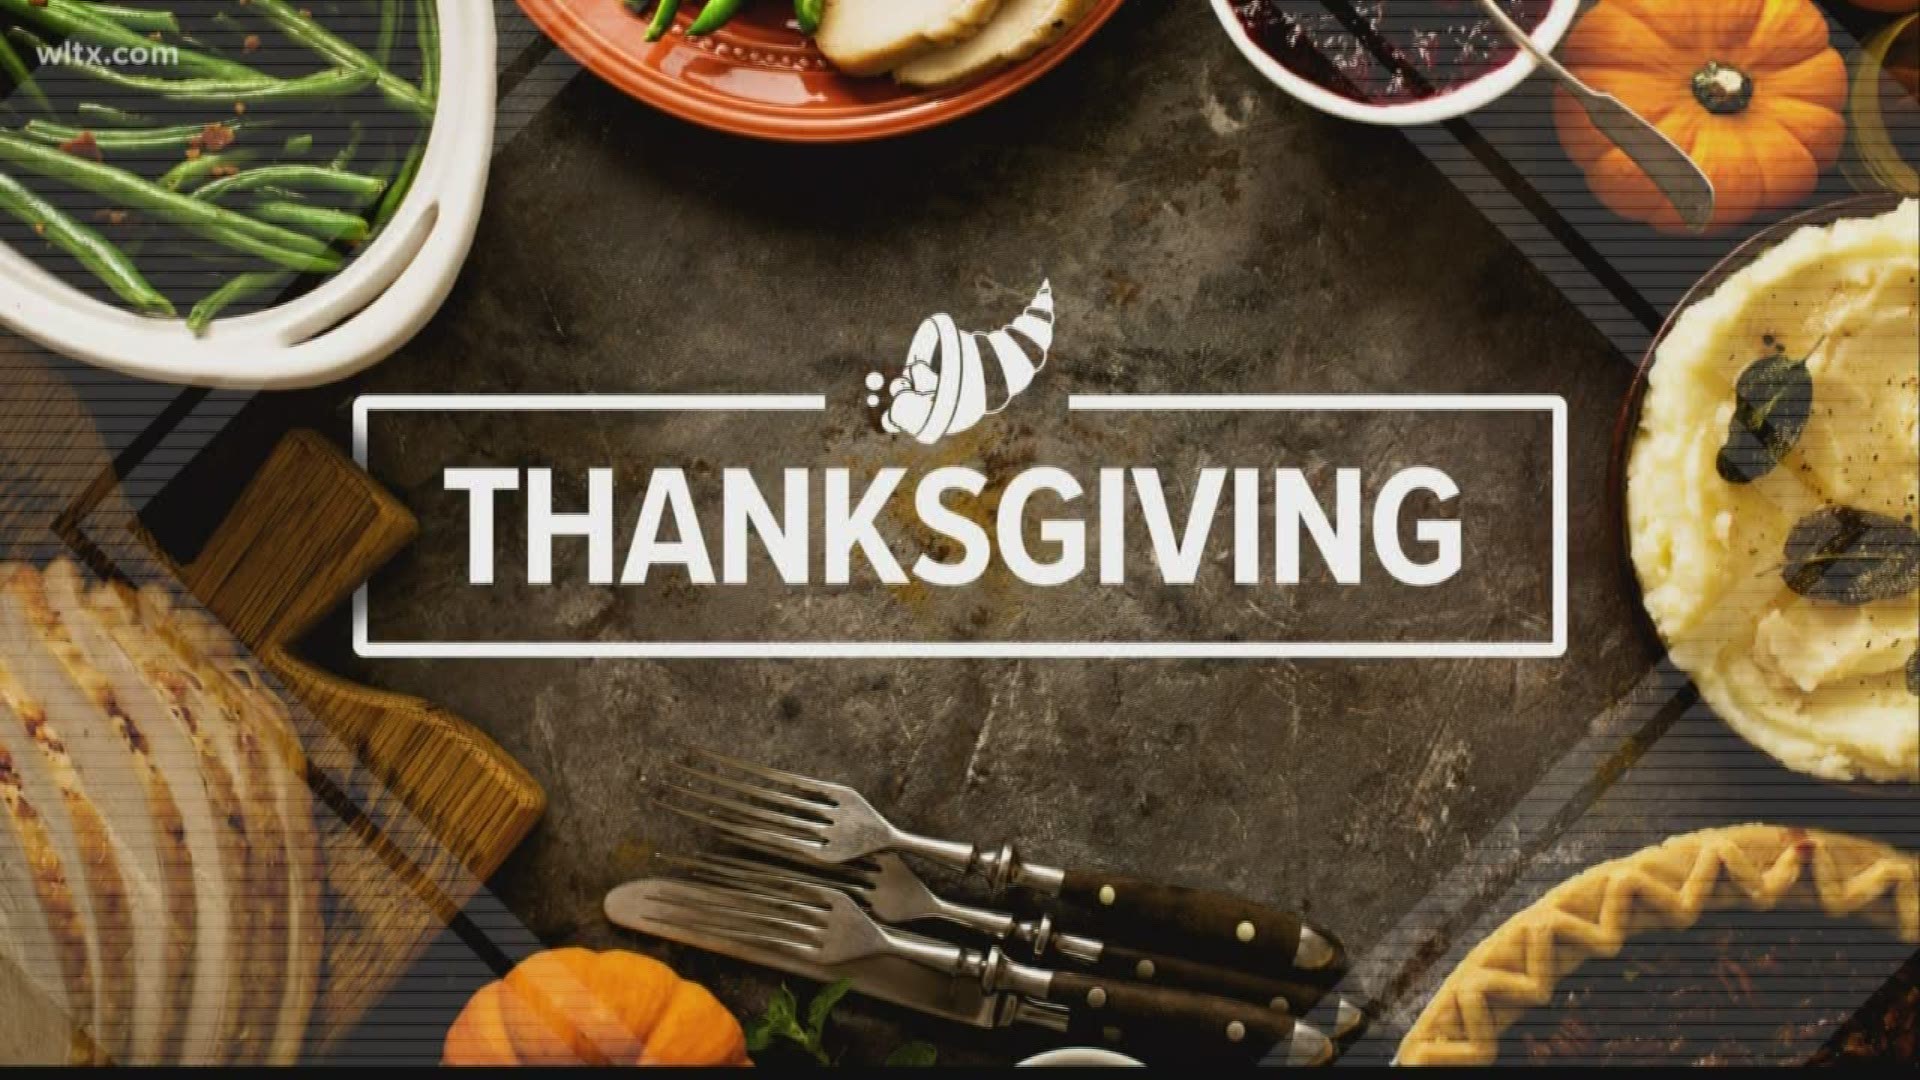 News19 is on your side with tips from local chefs on tips for preparing your Thanksgiving dinner.